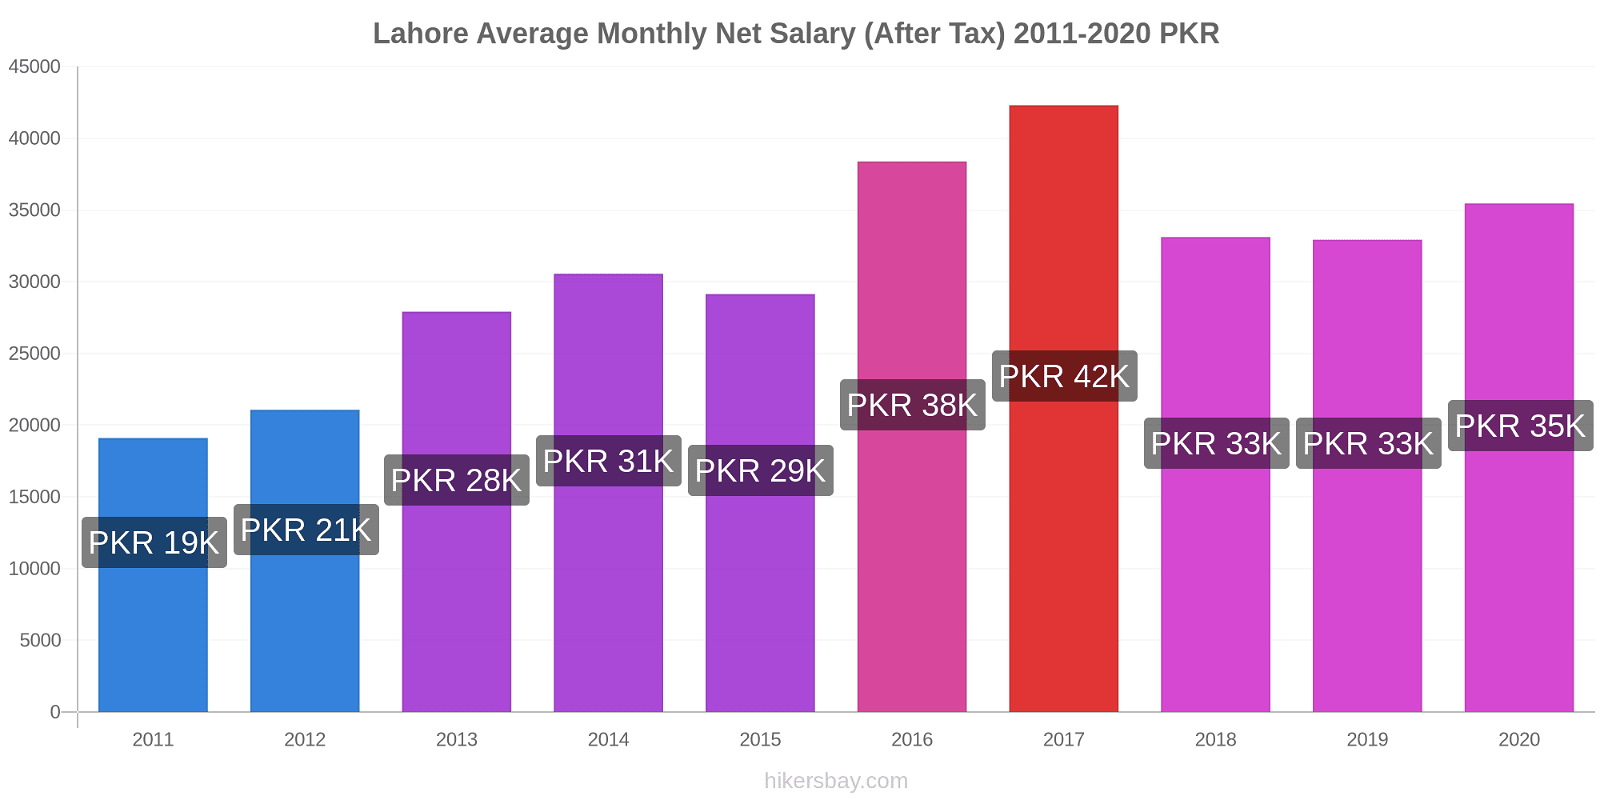 Lahore price changes Average Monthly Net Salary (After Tax) hikersbay.com